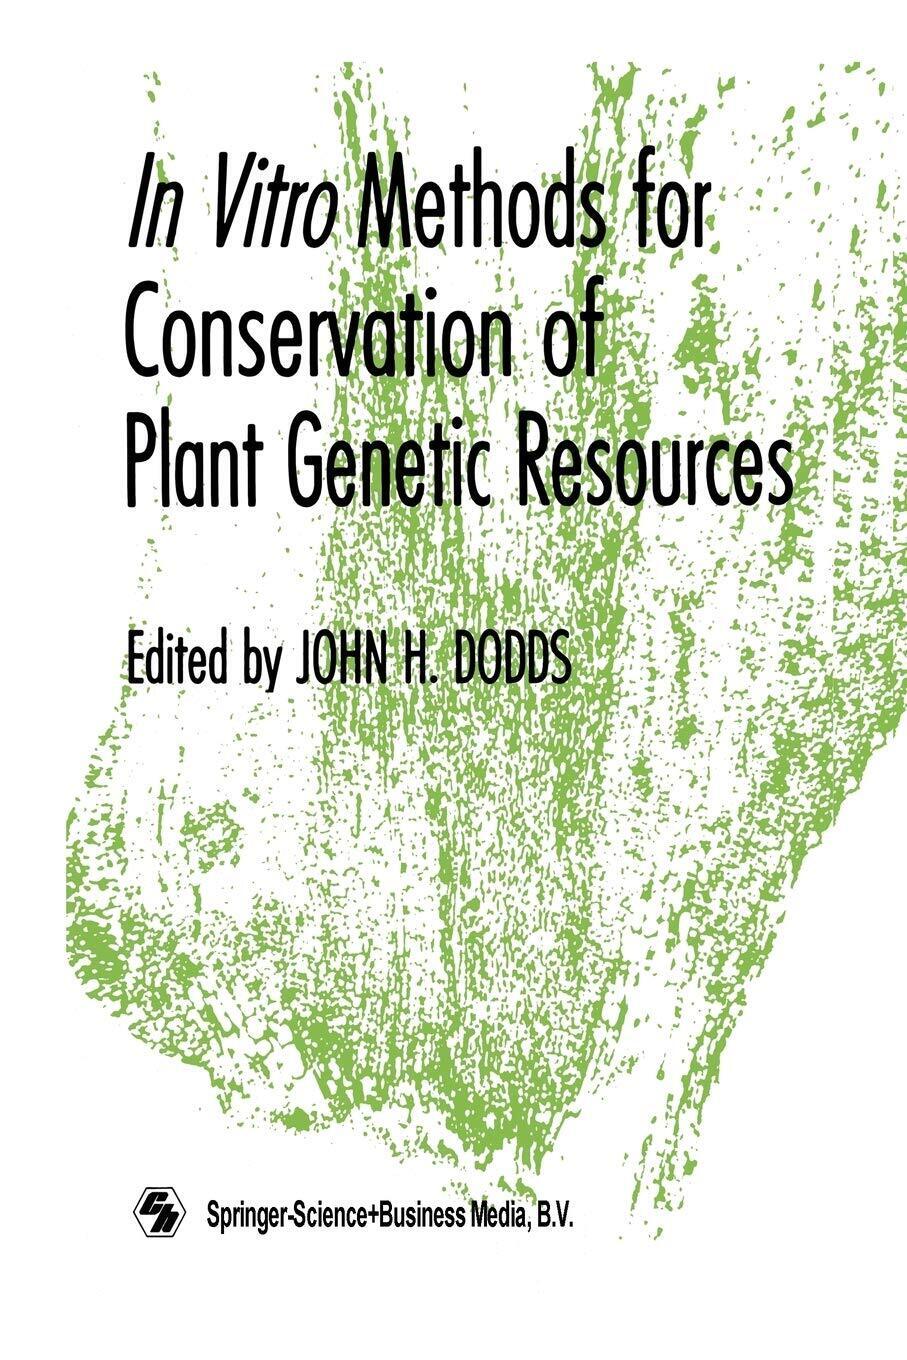 In Vitro Methods for Conservation of Plant Genetic Resources - Springer, 2012 libro usato